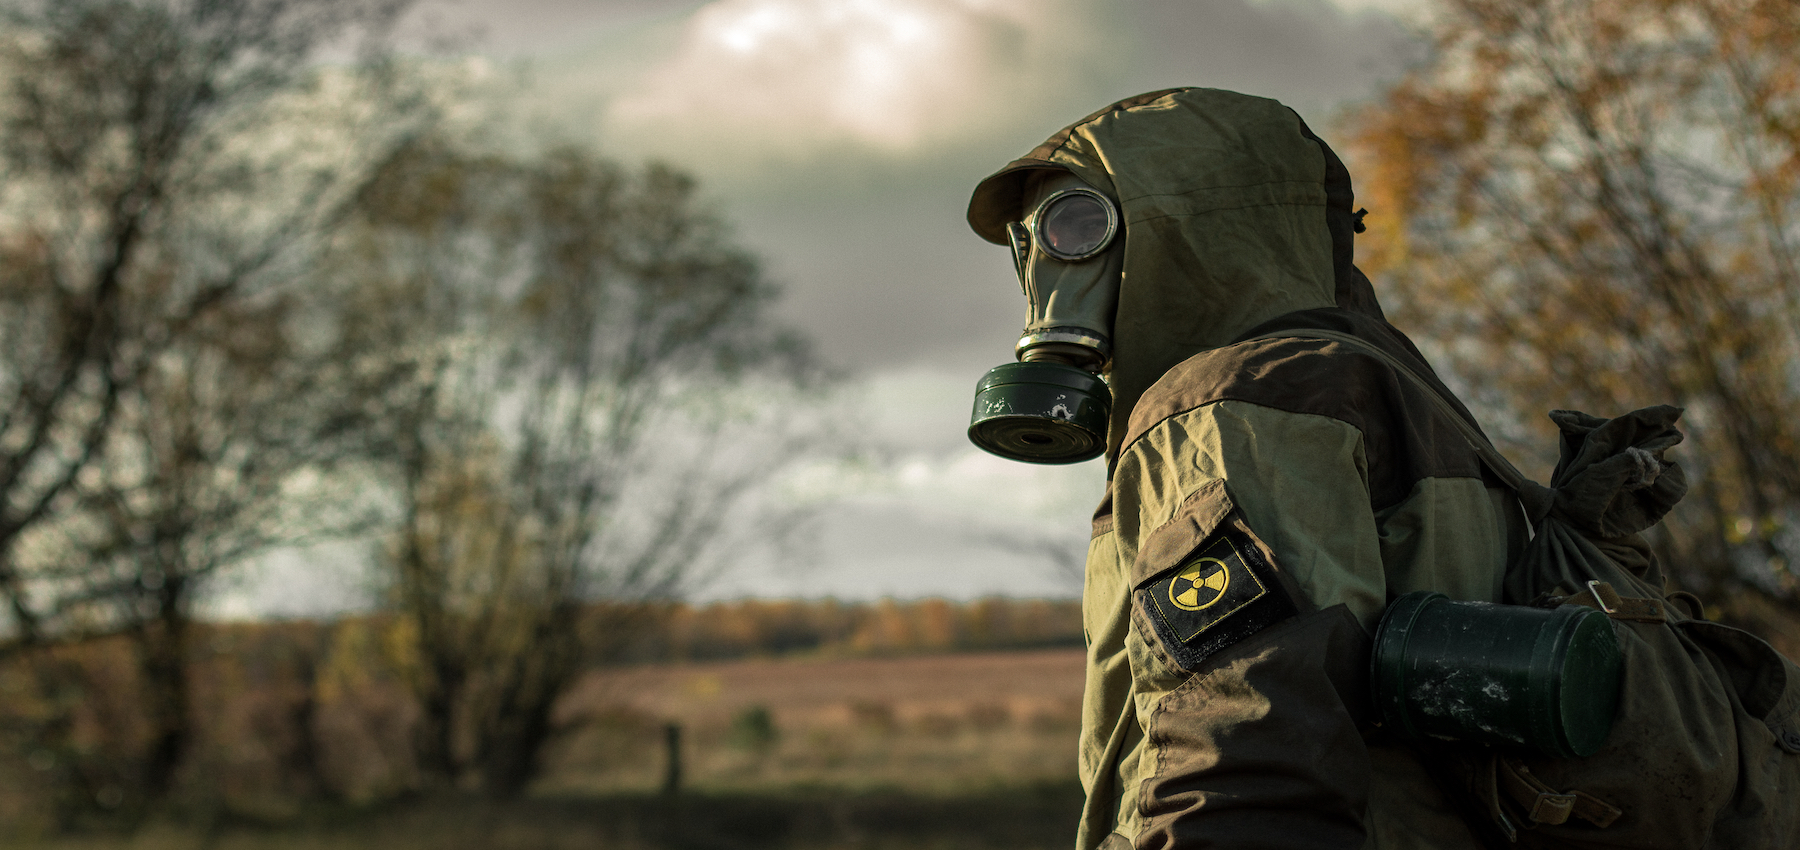 8 things you need to know before you buy a gas mask